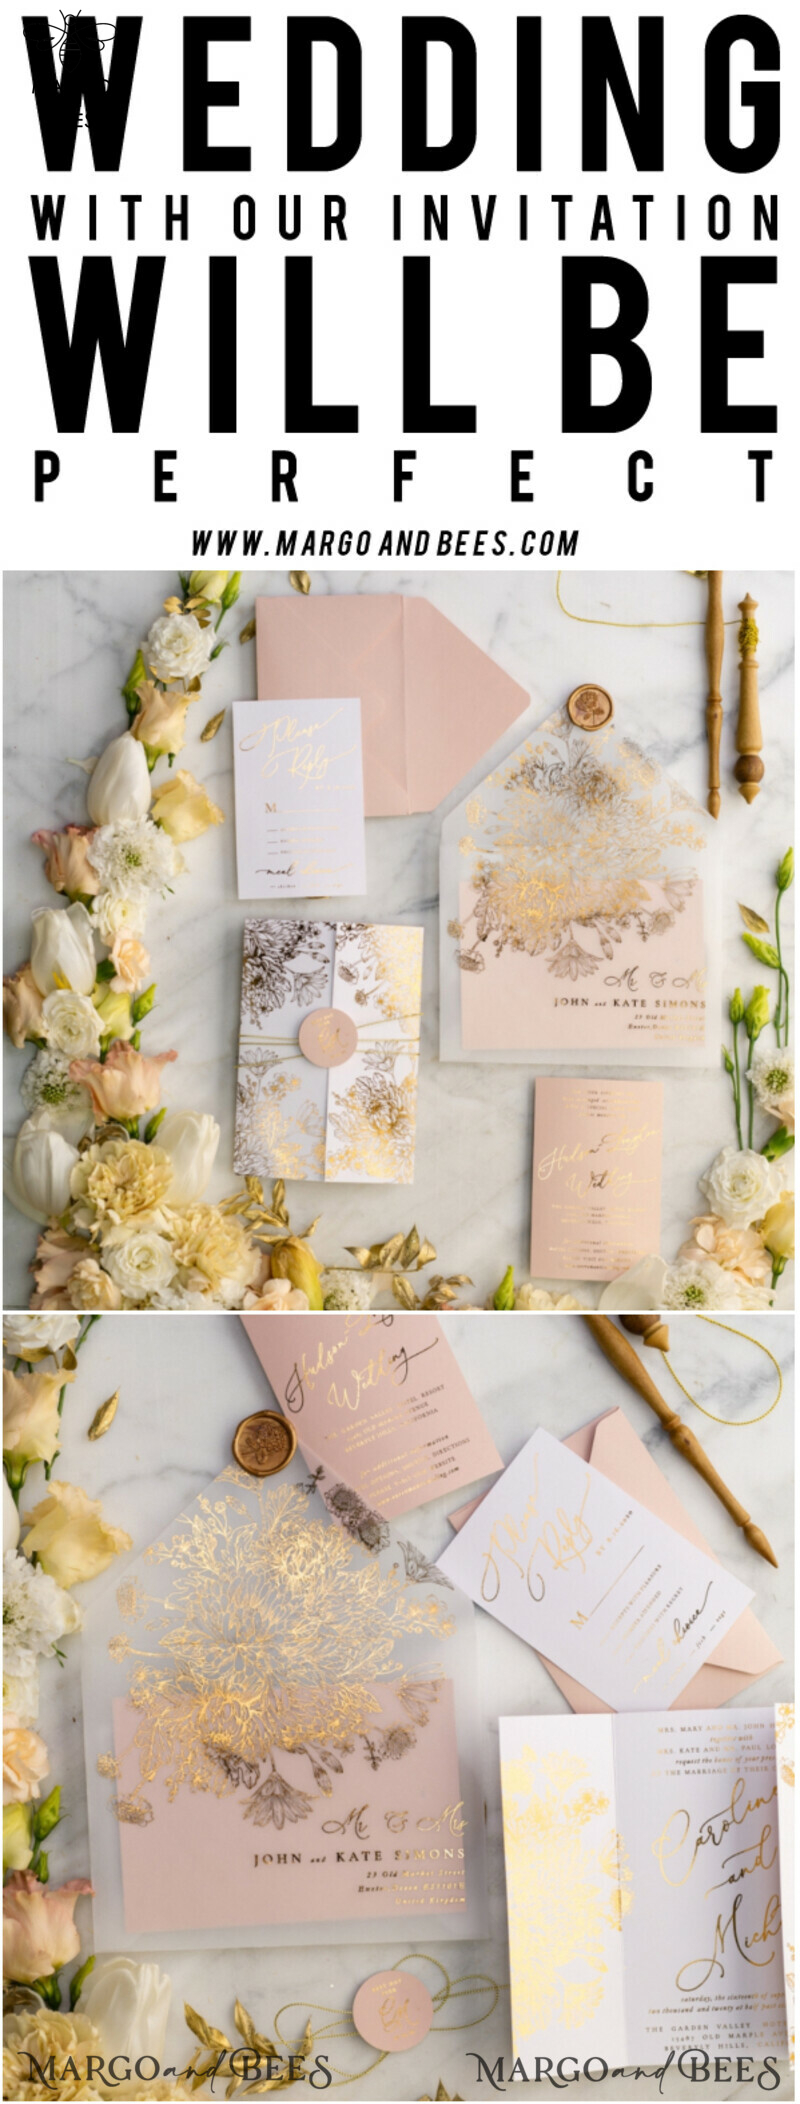 Exquisite Arabic Golden Wedding Invitations with Glamour Gold Foil and Romantic Blush Pink Touches: Bespoke Indian Wedding Stationery-37